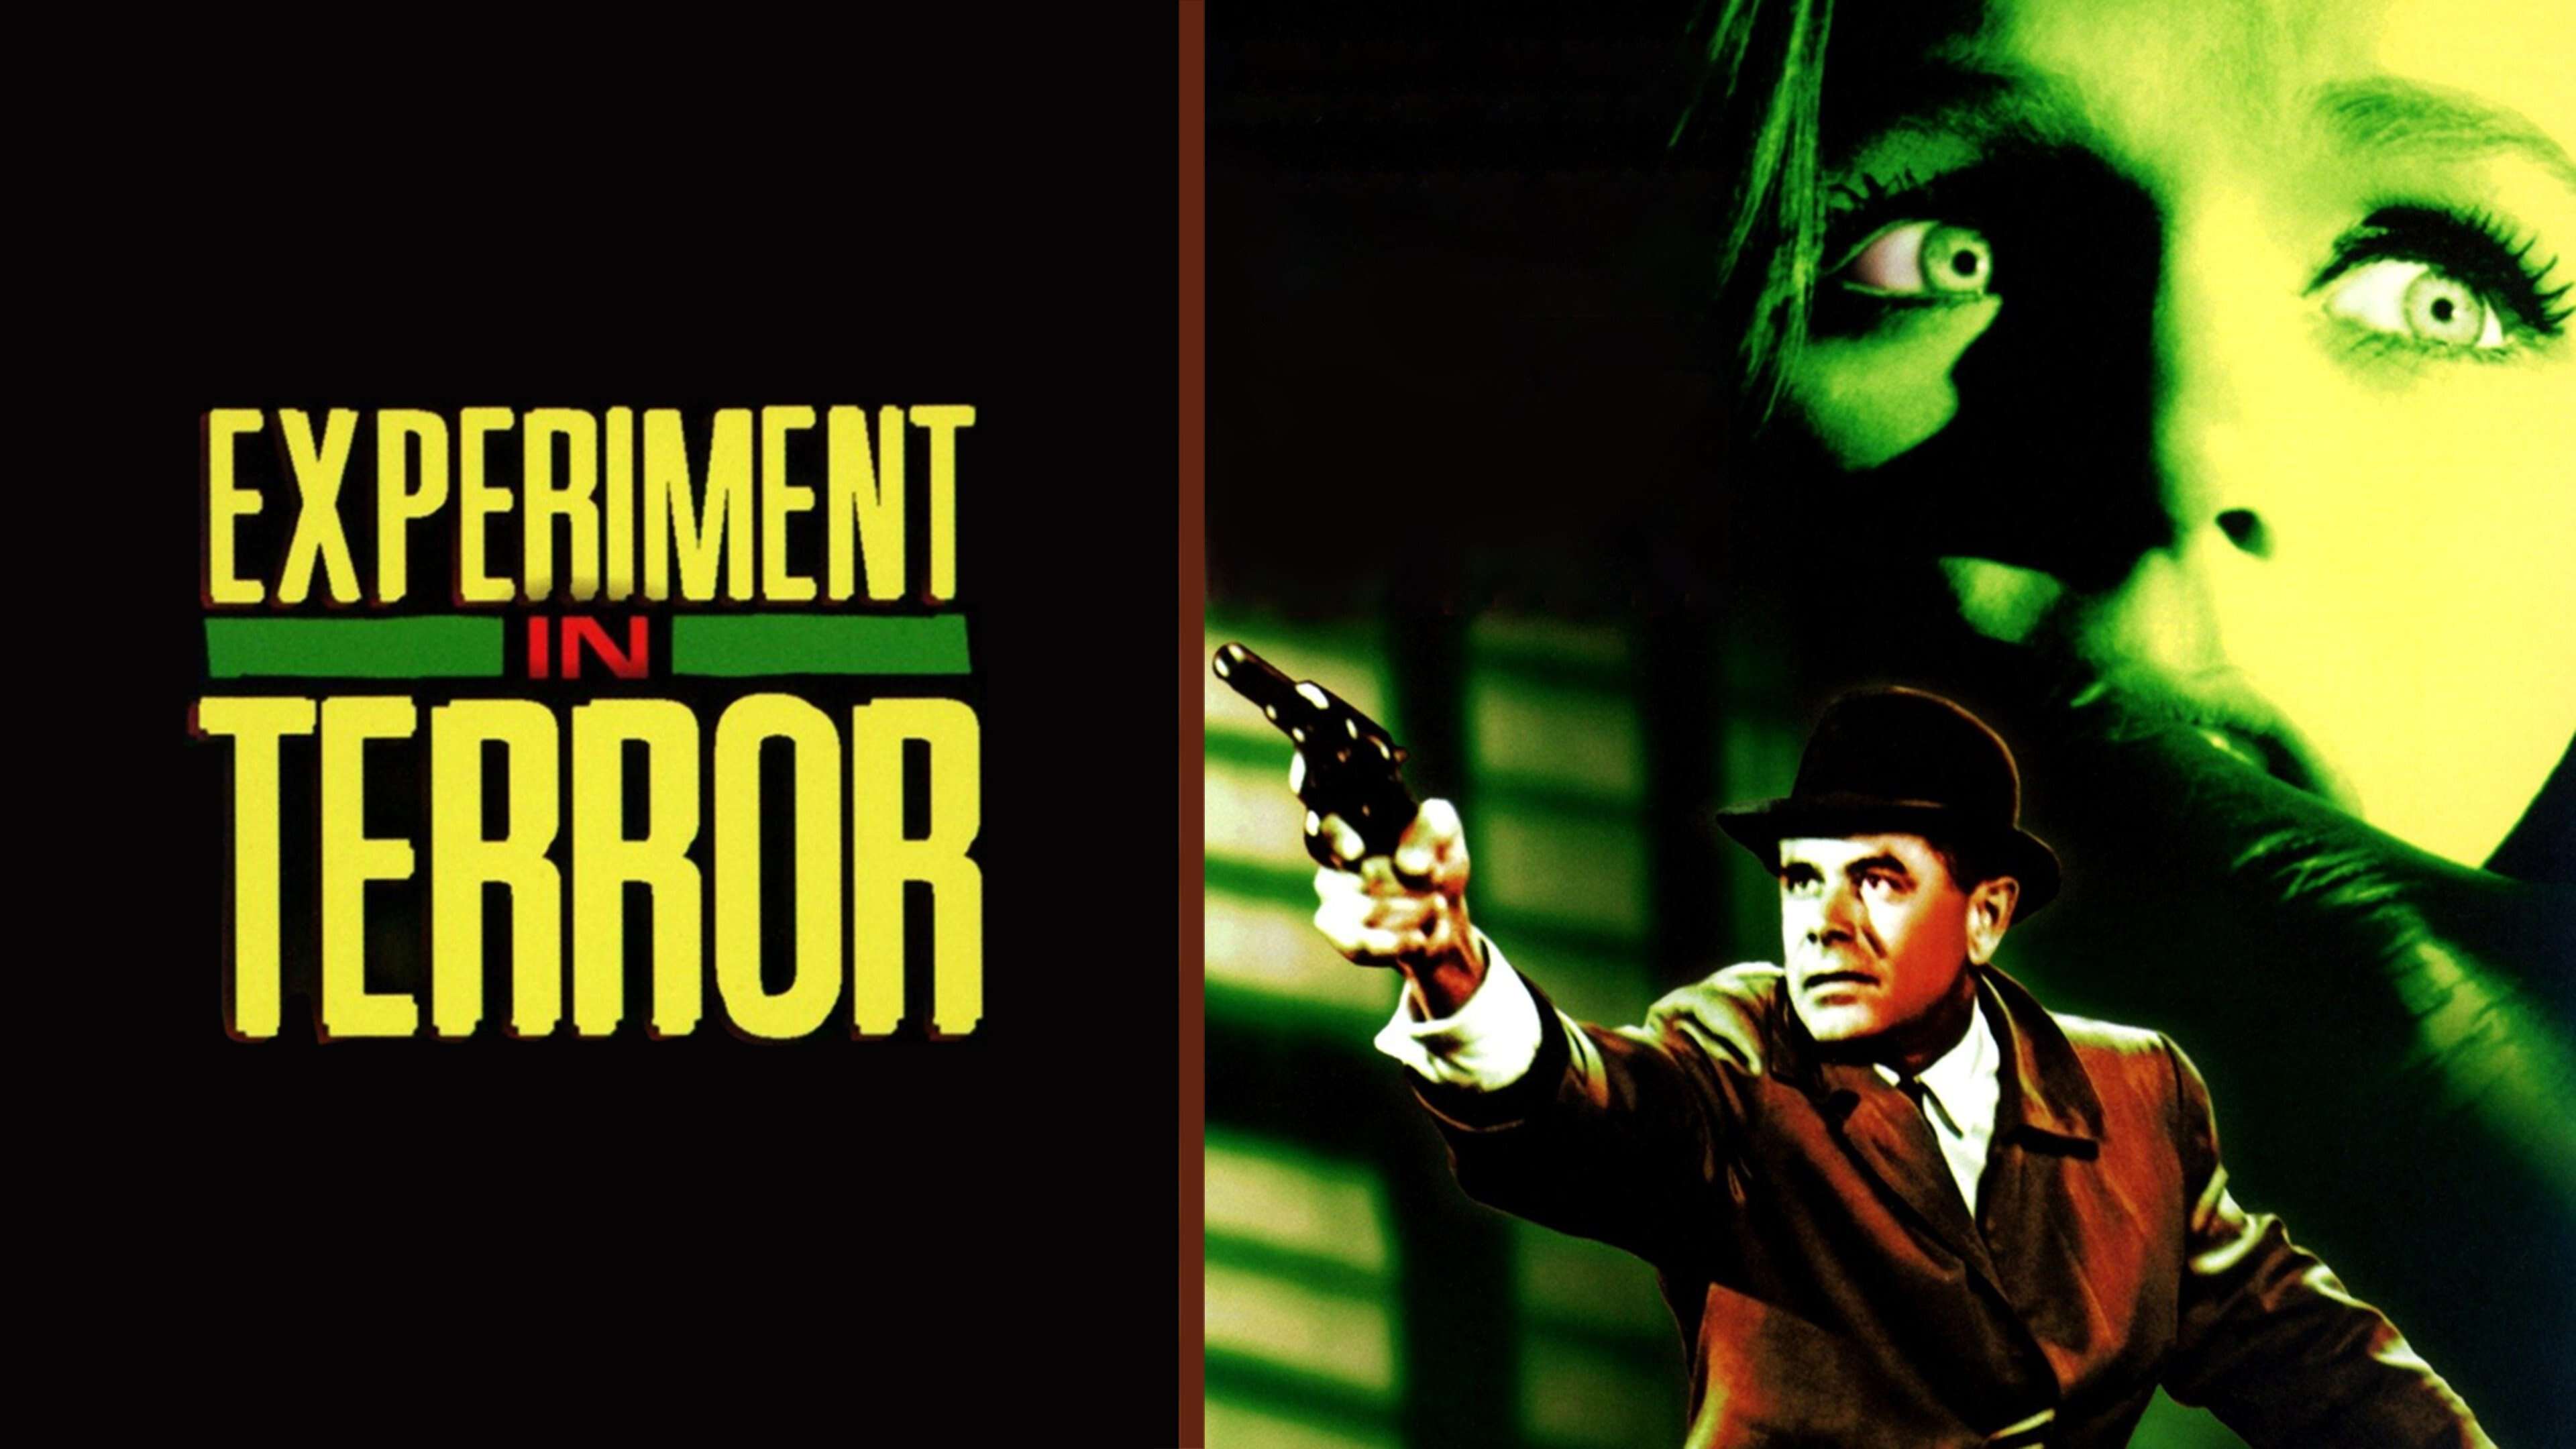 32-facts-about-the-movie-experiment-in-terror